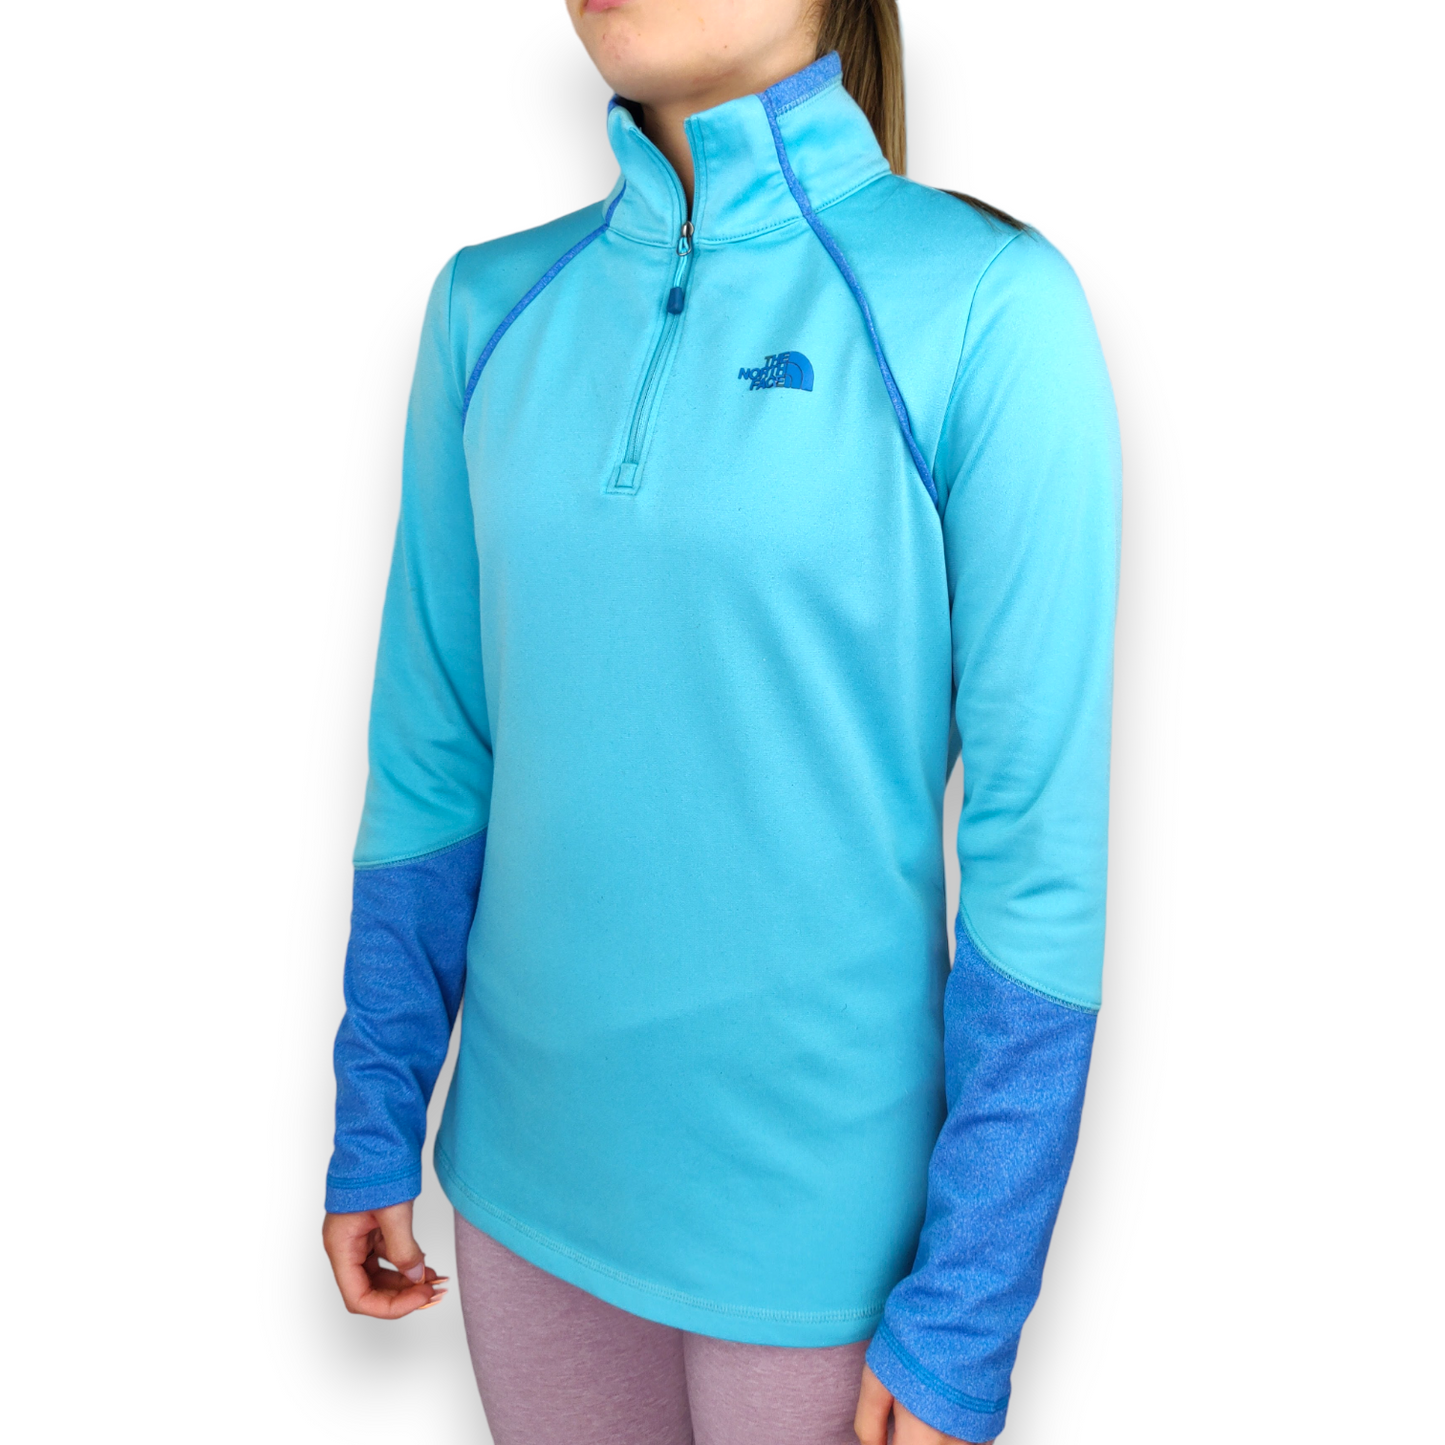 The North Face Blue Activewear Running Training Half Zip Top Stretch Women Size Small